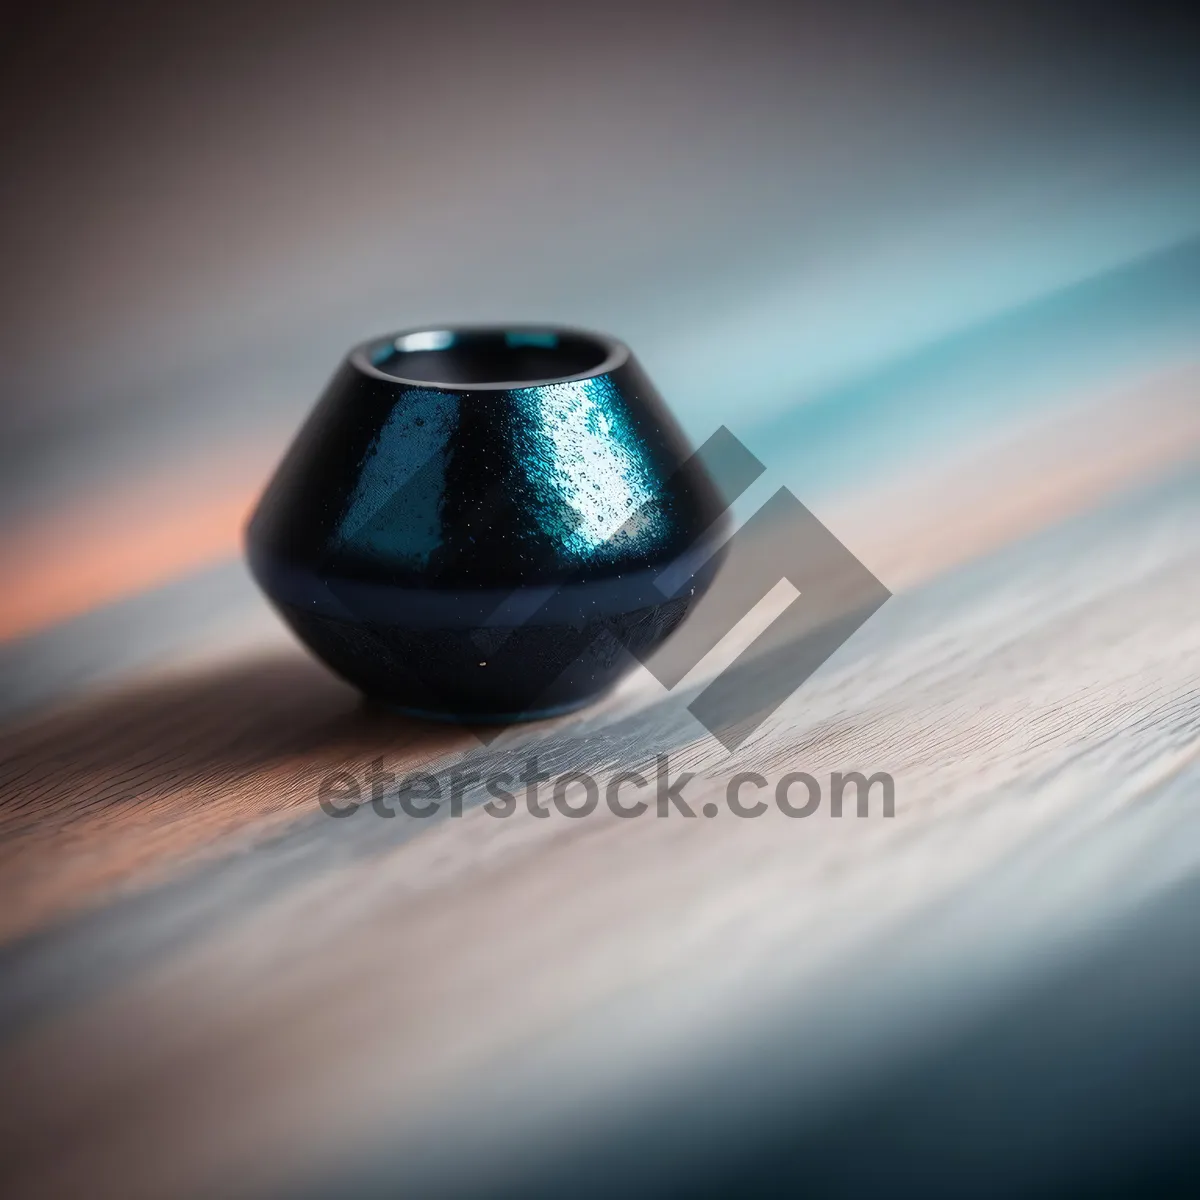 Picture of Black Spa Pebble Zen Relaxation